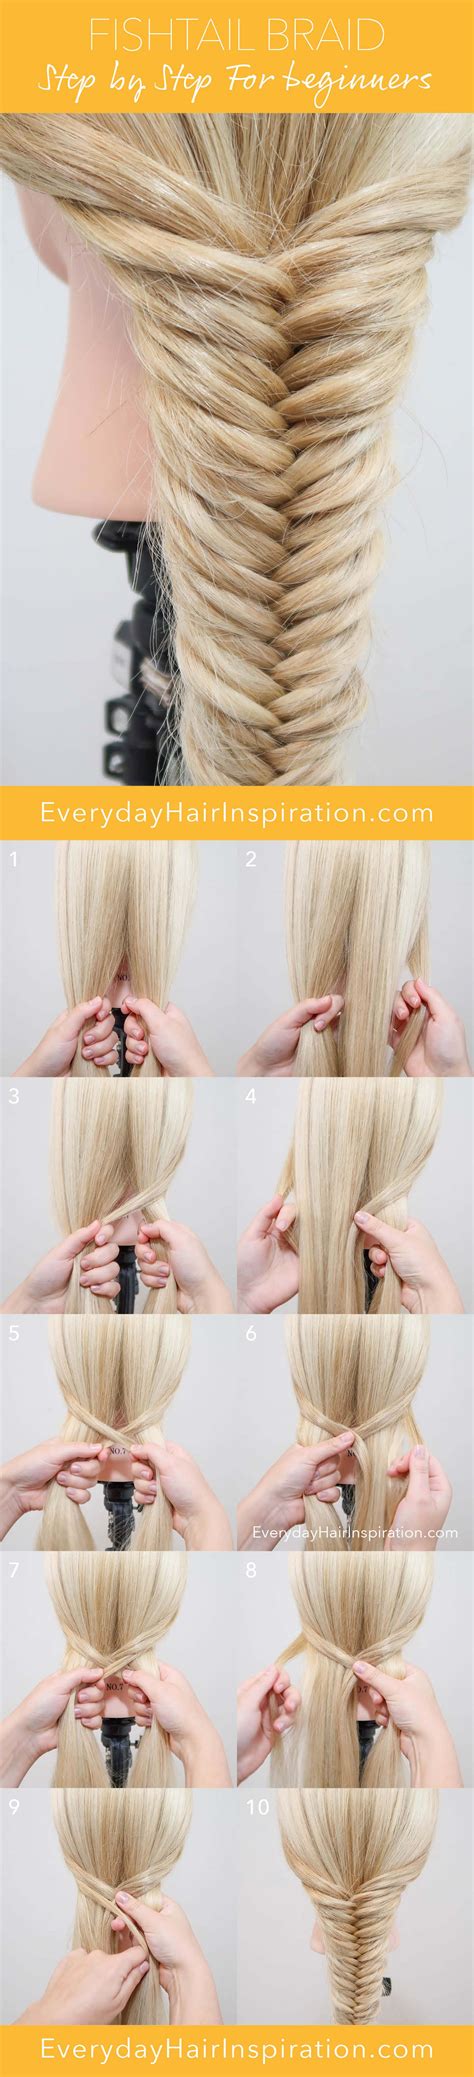 How To Fishtail: A Step-By-Step Guide